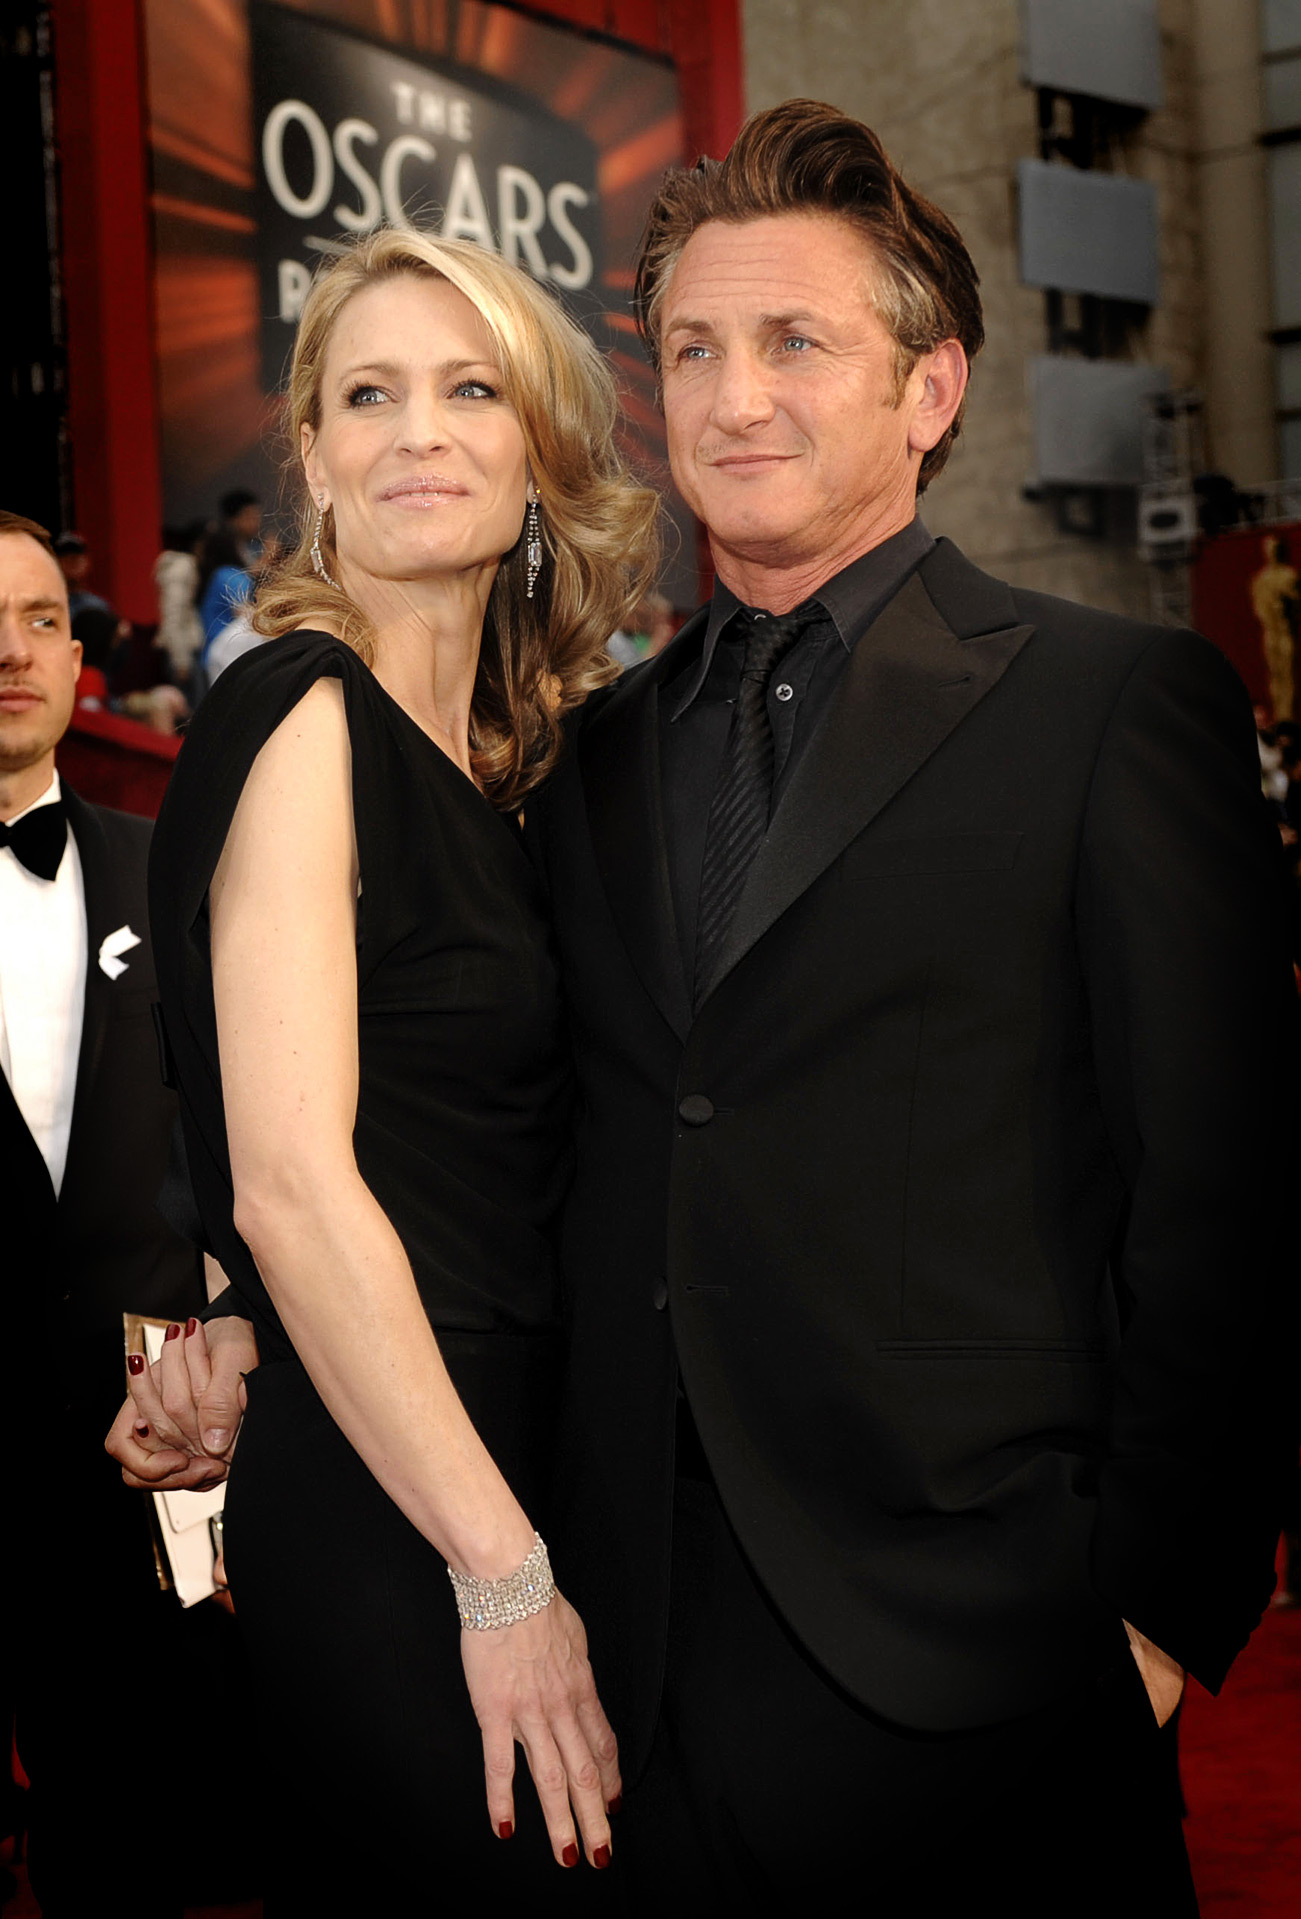 Exes Sean Penn, Robin Wright Spotted Together for 1st Time in Years pic